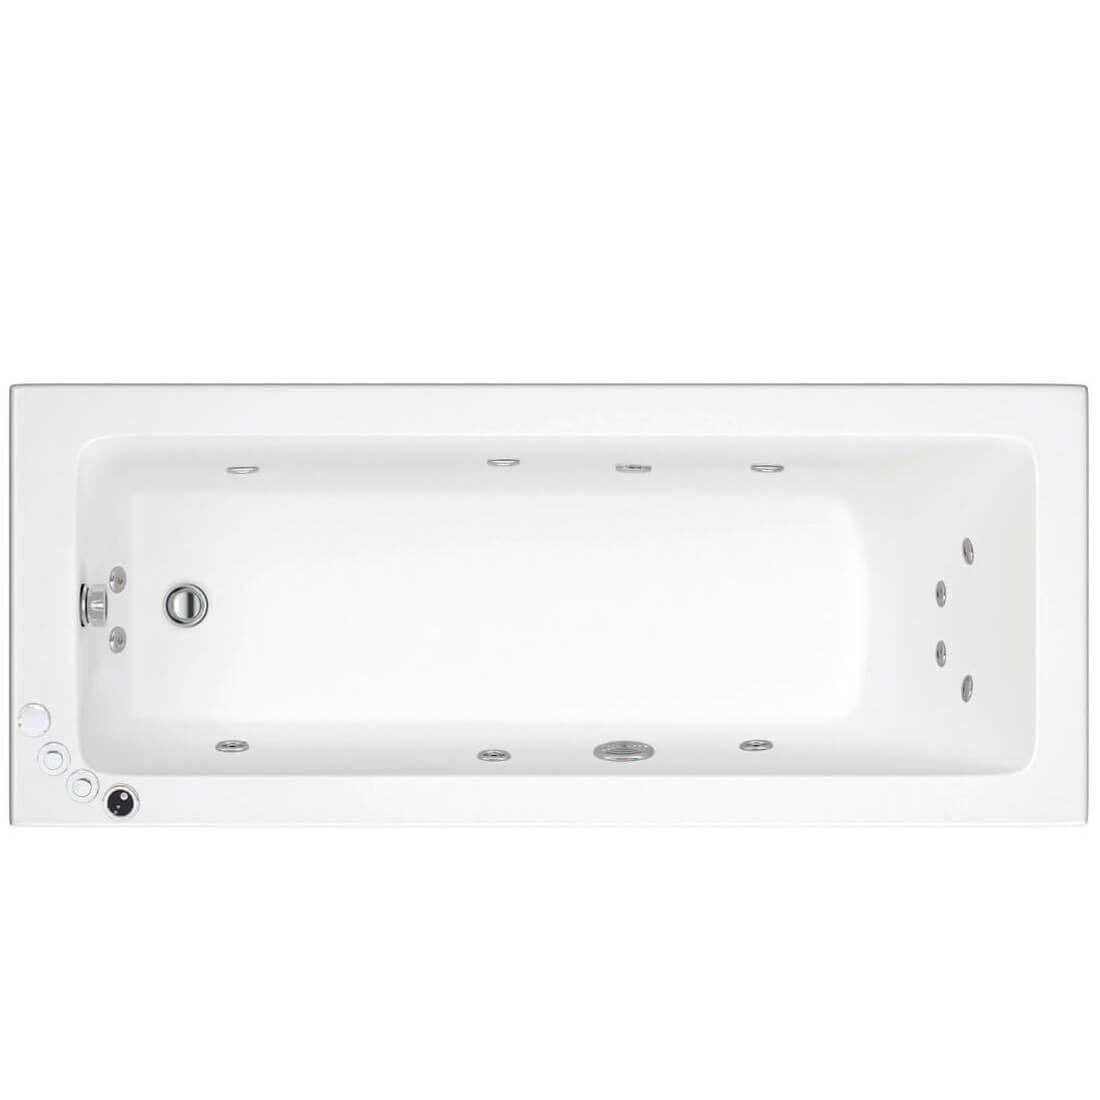 An image of Lisna Waters Florence 1700Mm X 700Mm Single Ended Whirlpool Bath 12 Jet Encore S...